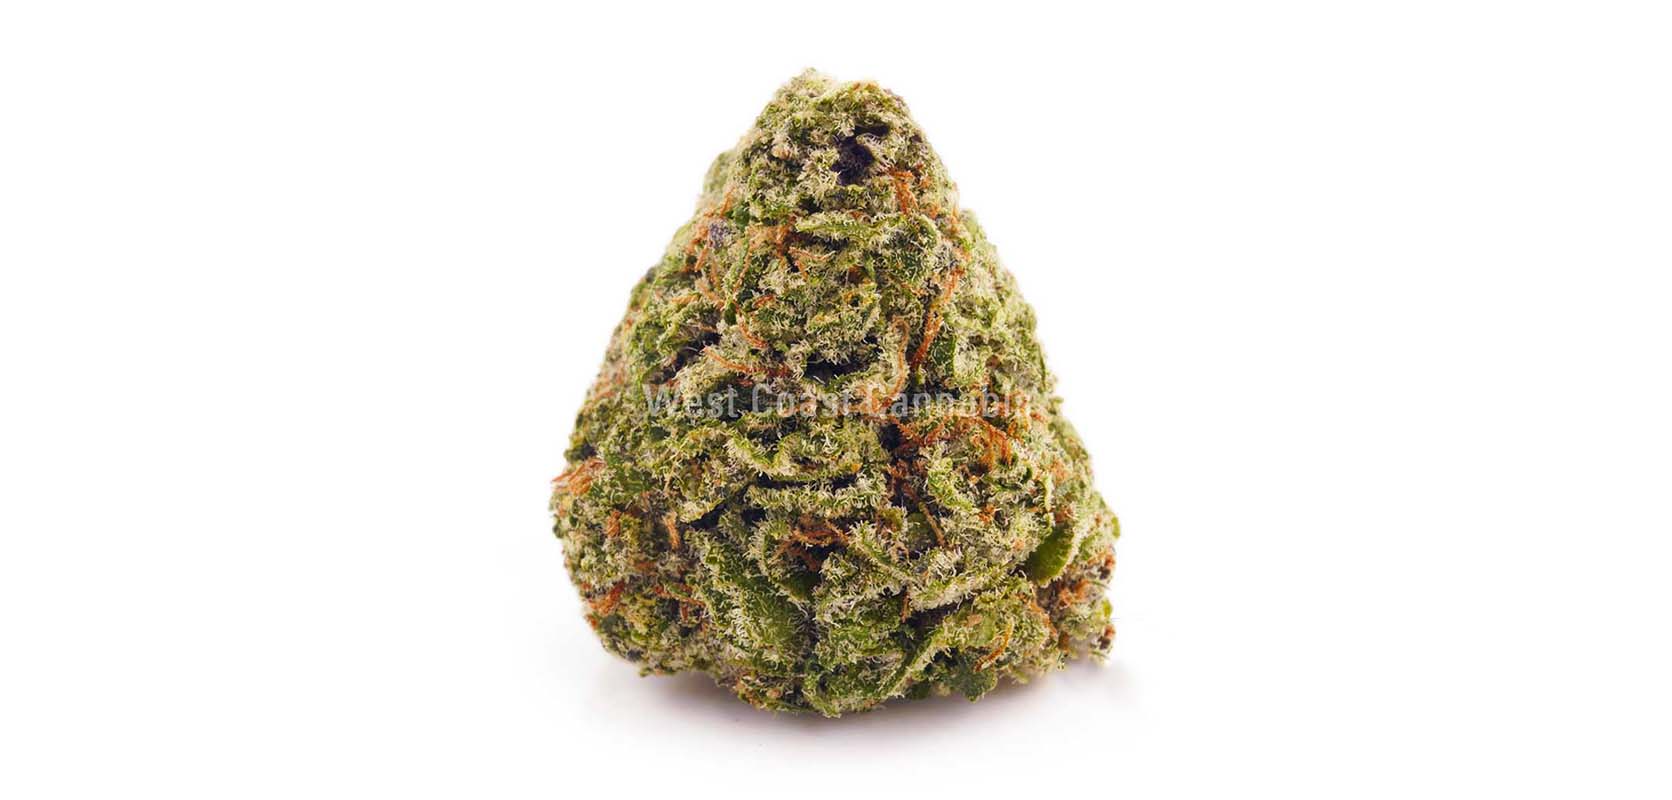 Lemon Kush value buds and weed online Canada. Mail order marijuana weed dispensary West Coast Cannabis. Buy online weeds. cheapweed.